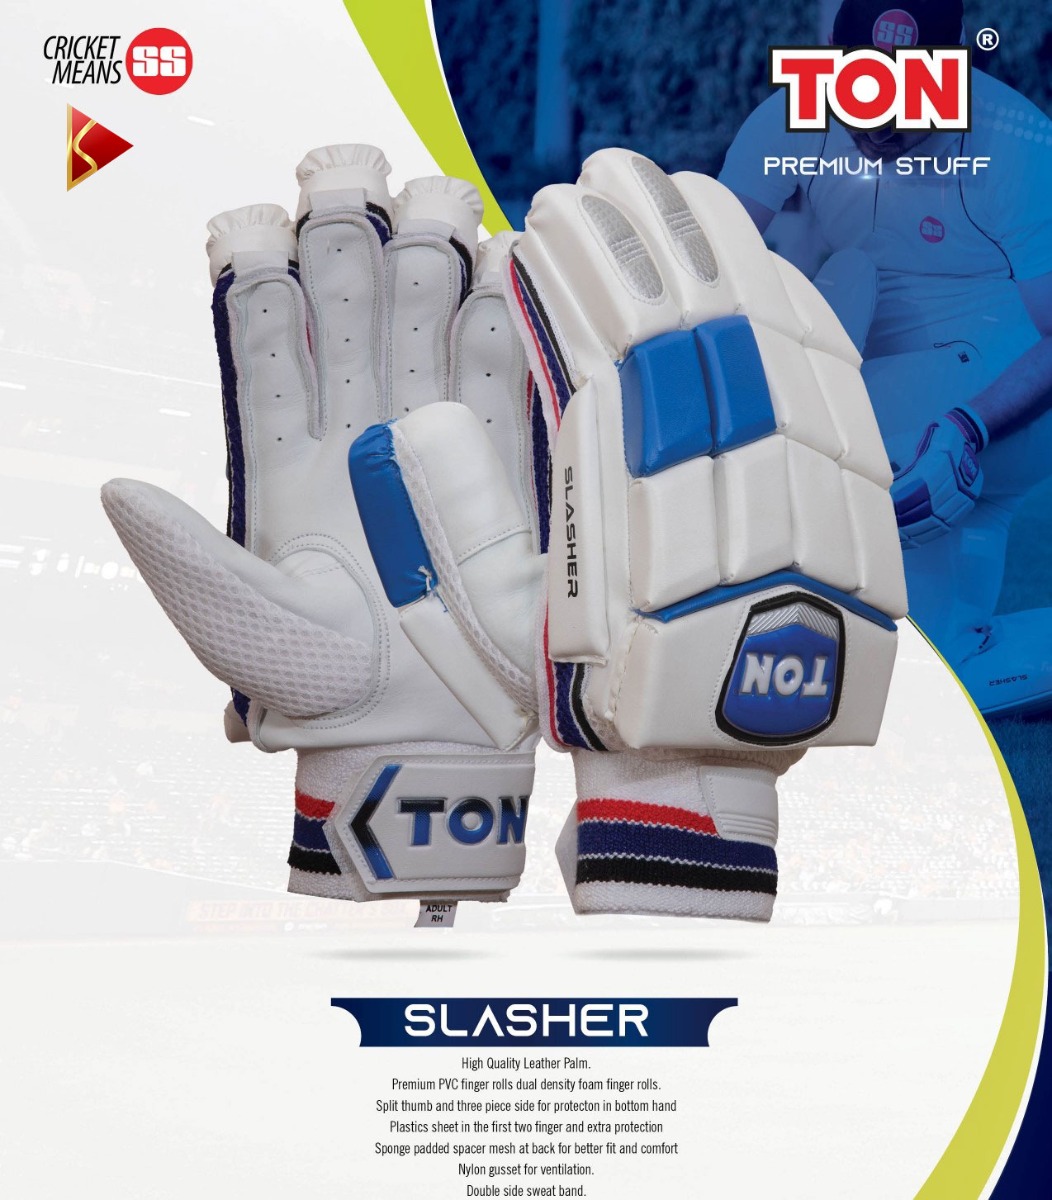 SS Ton Slasher Batting Gloves Features